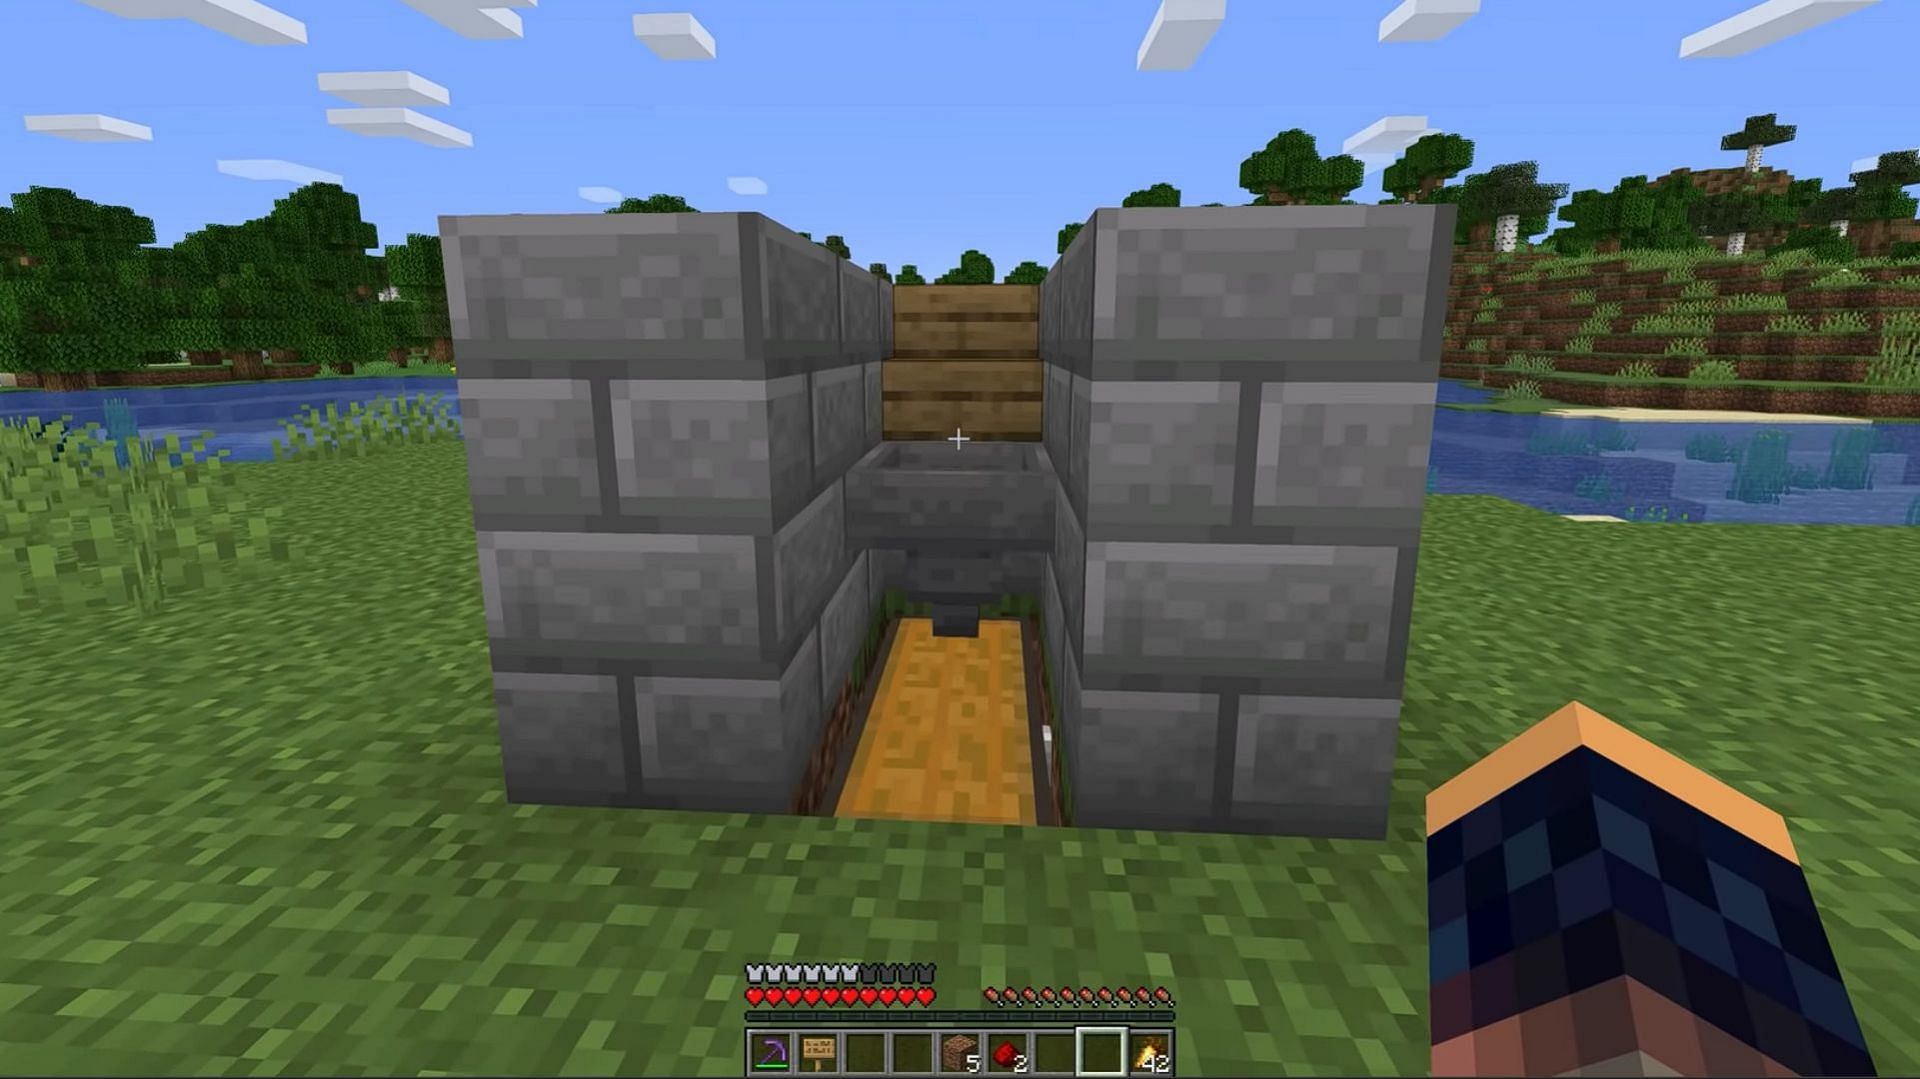 Players must first create the base of the Minecraft farm where they will stand and place concrete powder blocks (Image via YouTube/Shulkercraft)